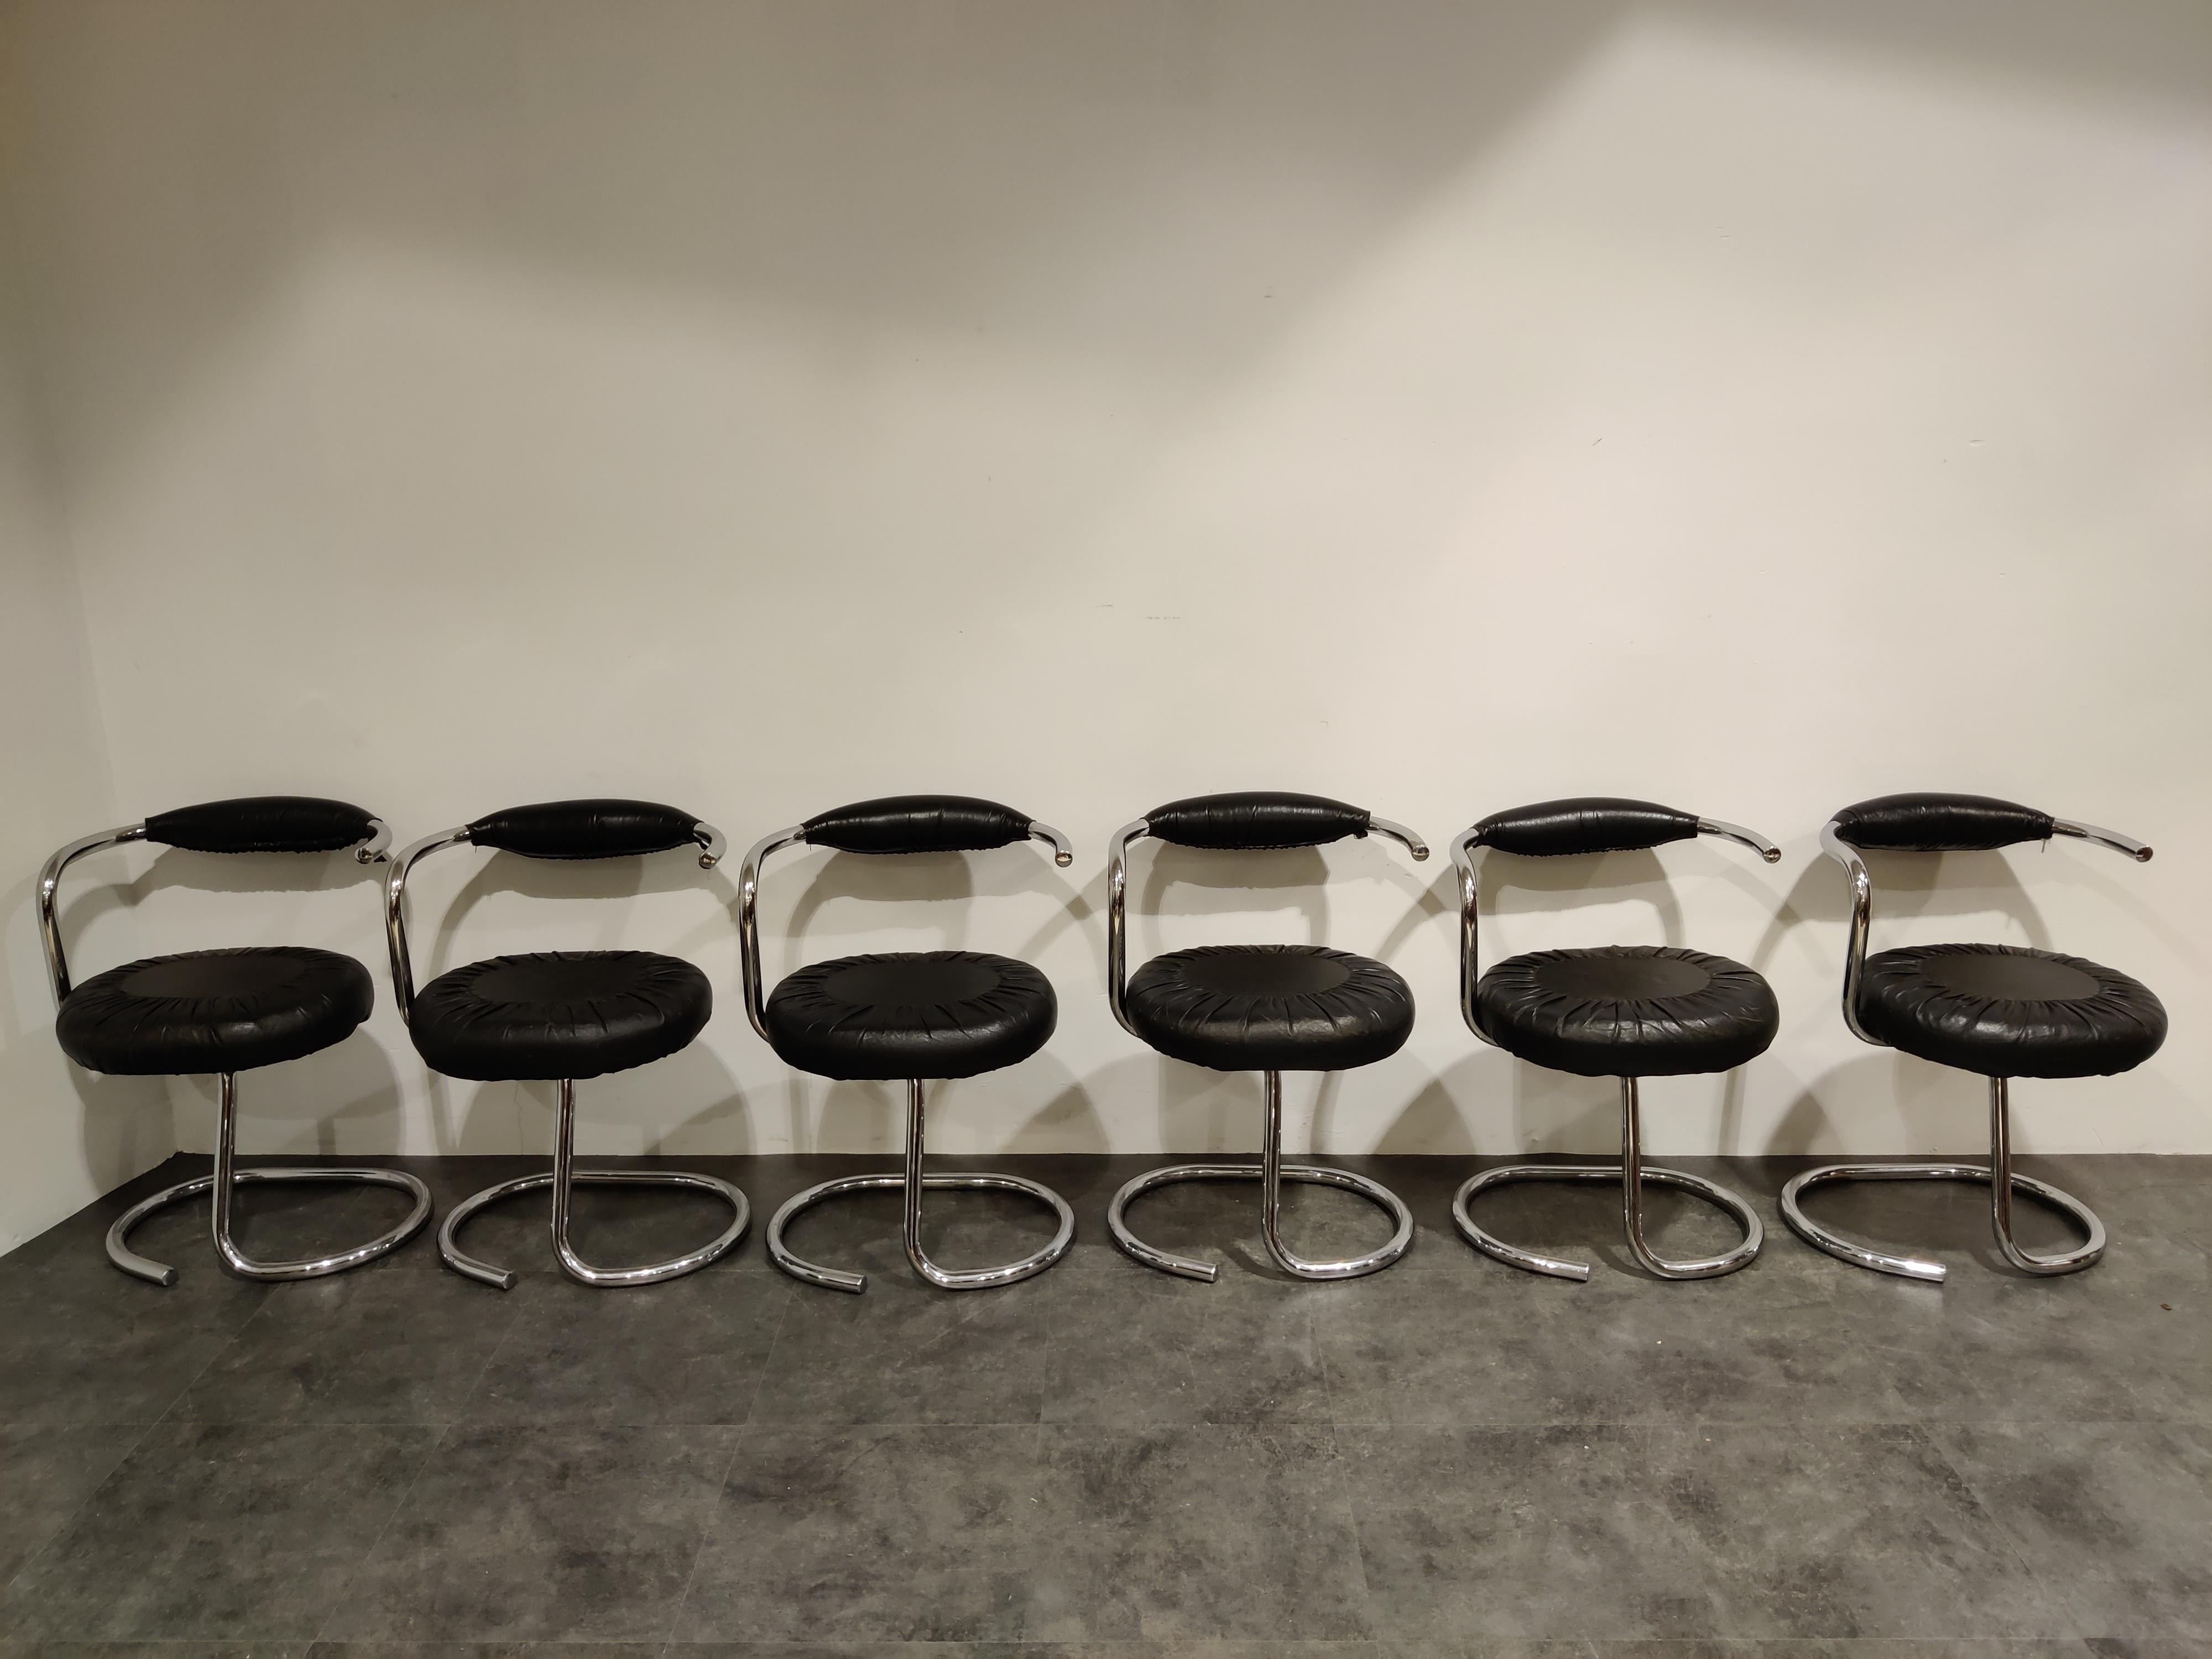 Set of 6 'cobra' chairs designed by Italian designer Giotto Stoppino.

Comes with their original black leather upholstery.

Good original condition with normal wear, no rust. 

1970s - Italy

Measurements
Width 58 cm/22.8